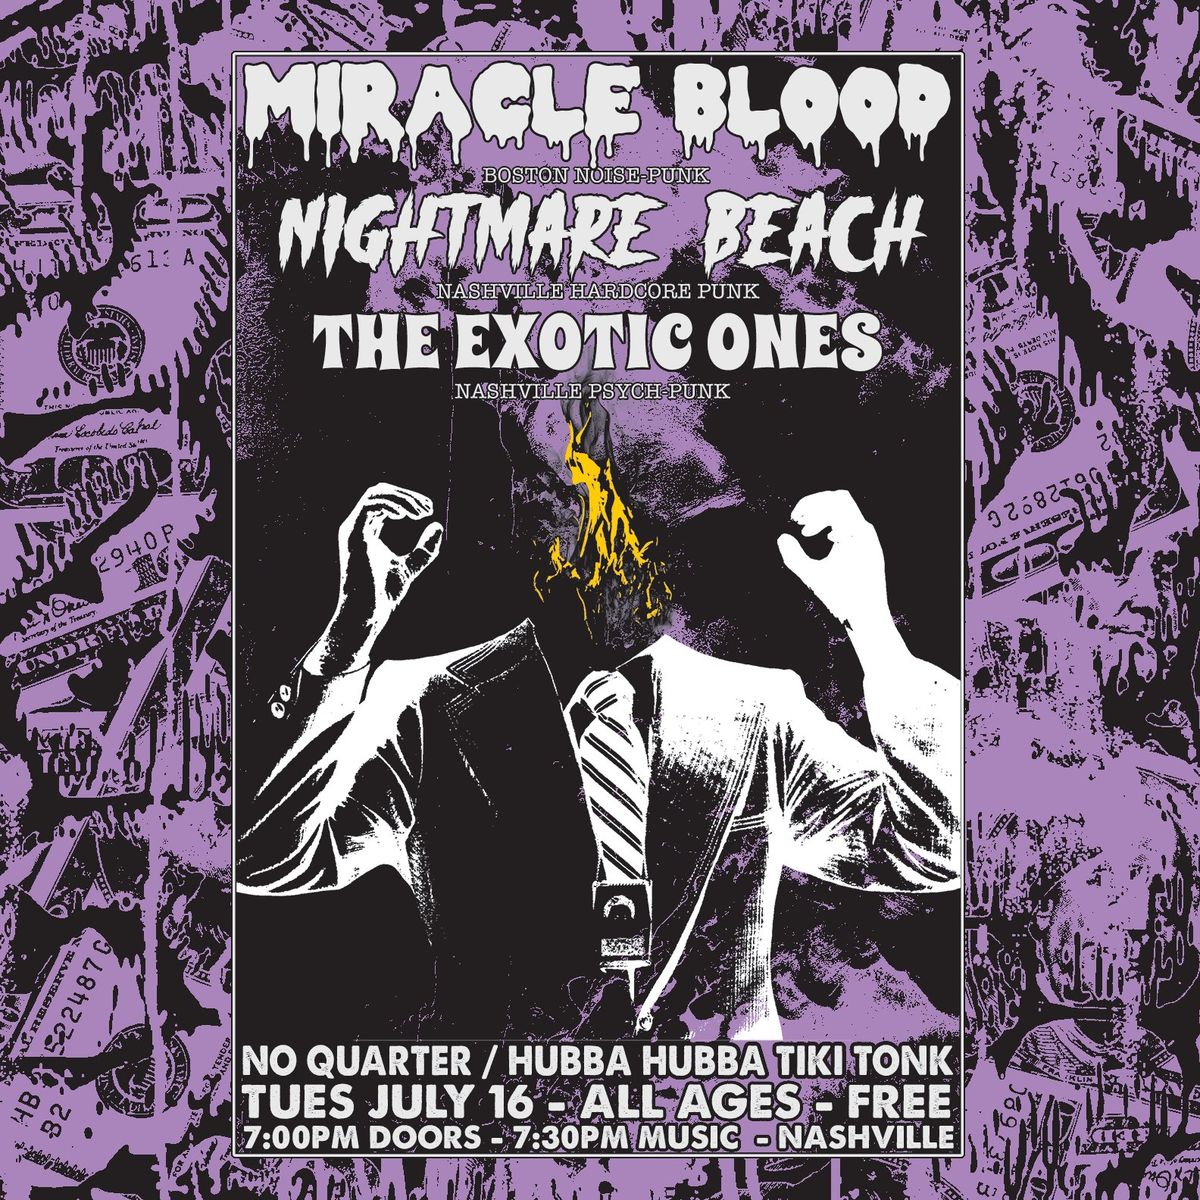 Miracle Blood, Nightmare Beach, and The Exotic Ones at No Quarter\/Hubba Hubba Tiki Tonk